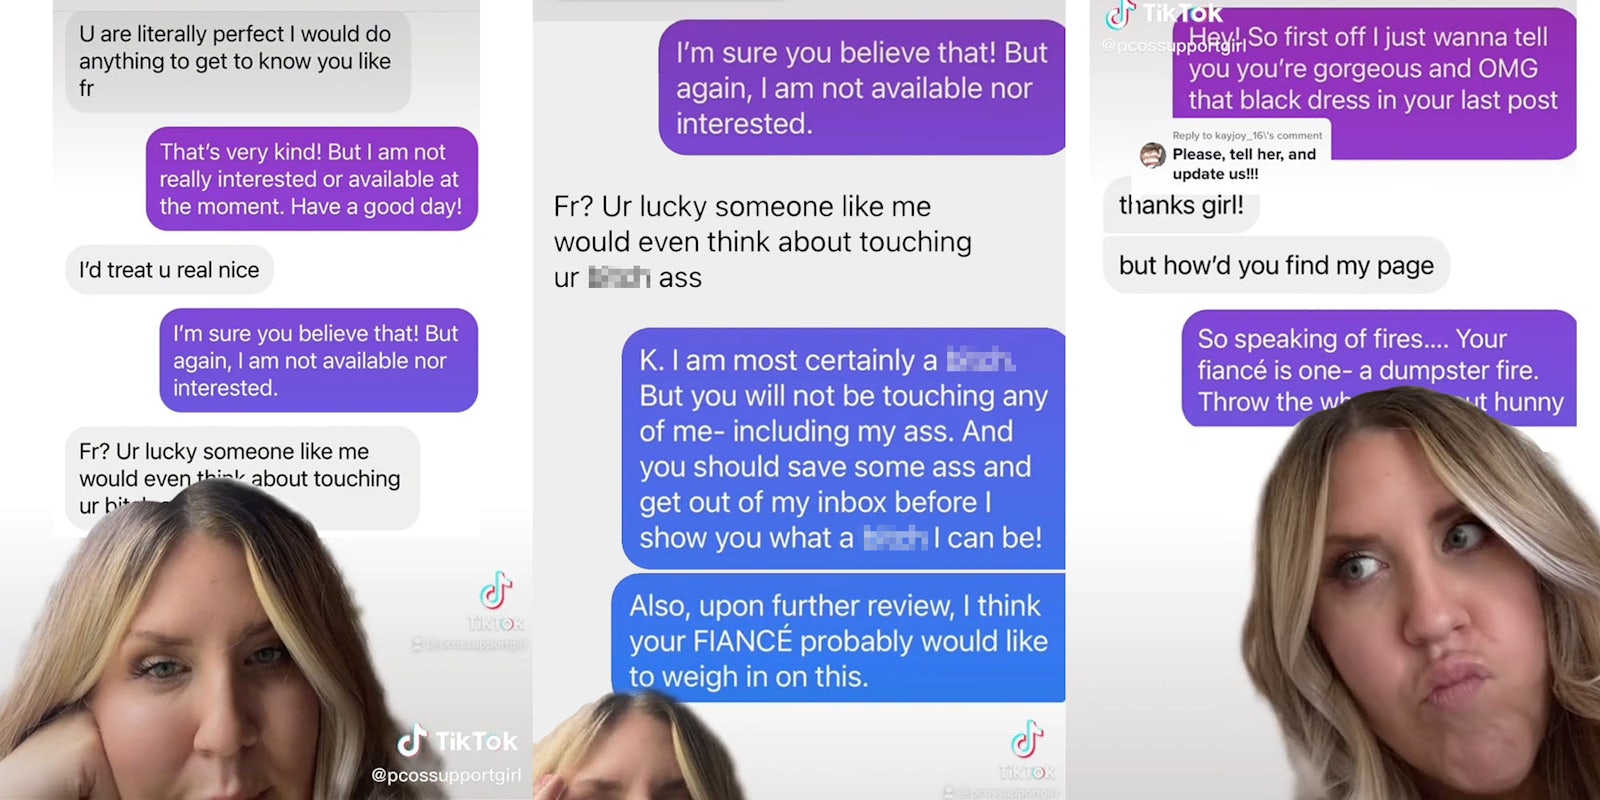 Greenscreen tiktok woman over text messages 'U are literally perfect I would do anything to get to know you like fr' 'That's very kind! But i am not really interested or available at the moment. Have a good day!' 'I'd treat u real nice' ' I'm sure you believe that! But again, I am not available nor interested' 'Fr? Ur lucky someone like me would even think about touching ur blank' (l) Greenscreen tiktok woman over messages 'I'm sure you believe that! But again, I am not available nor interested.' 'Fr? Ur lucky someone like me would even think about touching ur blank ass' 'K. I am most certainly a blank. But you will not be touvhing any of me- including my ass. And you should save some ass and get out of my inbox before I show you what a blank I can be! Also, upon further review, I think your FIANCE probably would like to weigh in on this' (c) Woman greenscreen tiktok over messages 'Hey! So first off I just wanna tell you you're gorgeous and OMG that black dress in your last post' 'thanks girl! but how'd you find my page' So speaking of fires... your fiance is one dumpster fire. Throw the whole man out hunny' caption 'Please tell her and update us!' (r)